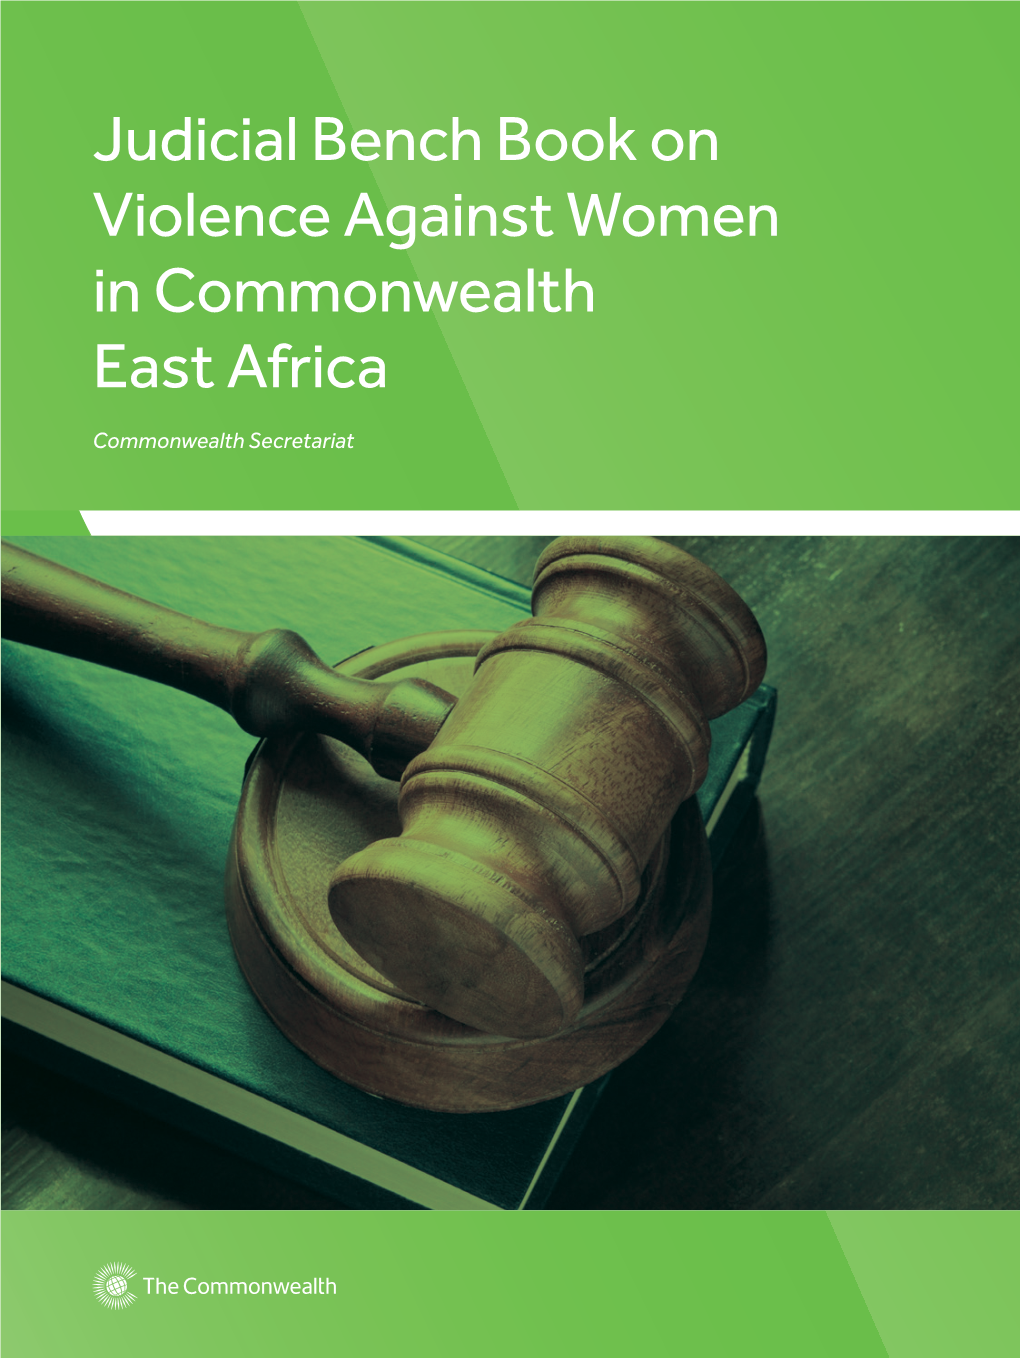 Judicial Bench Book on Violence Against Women in Commonwealth